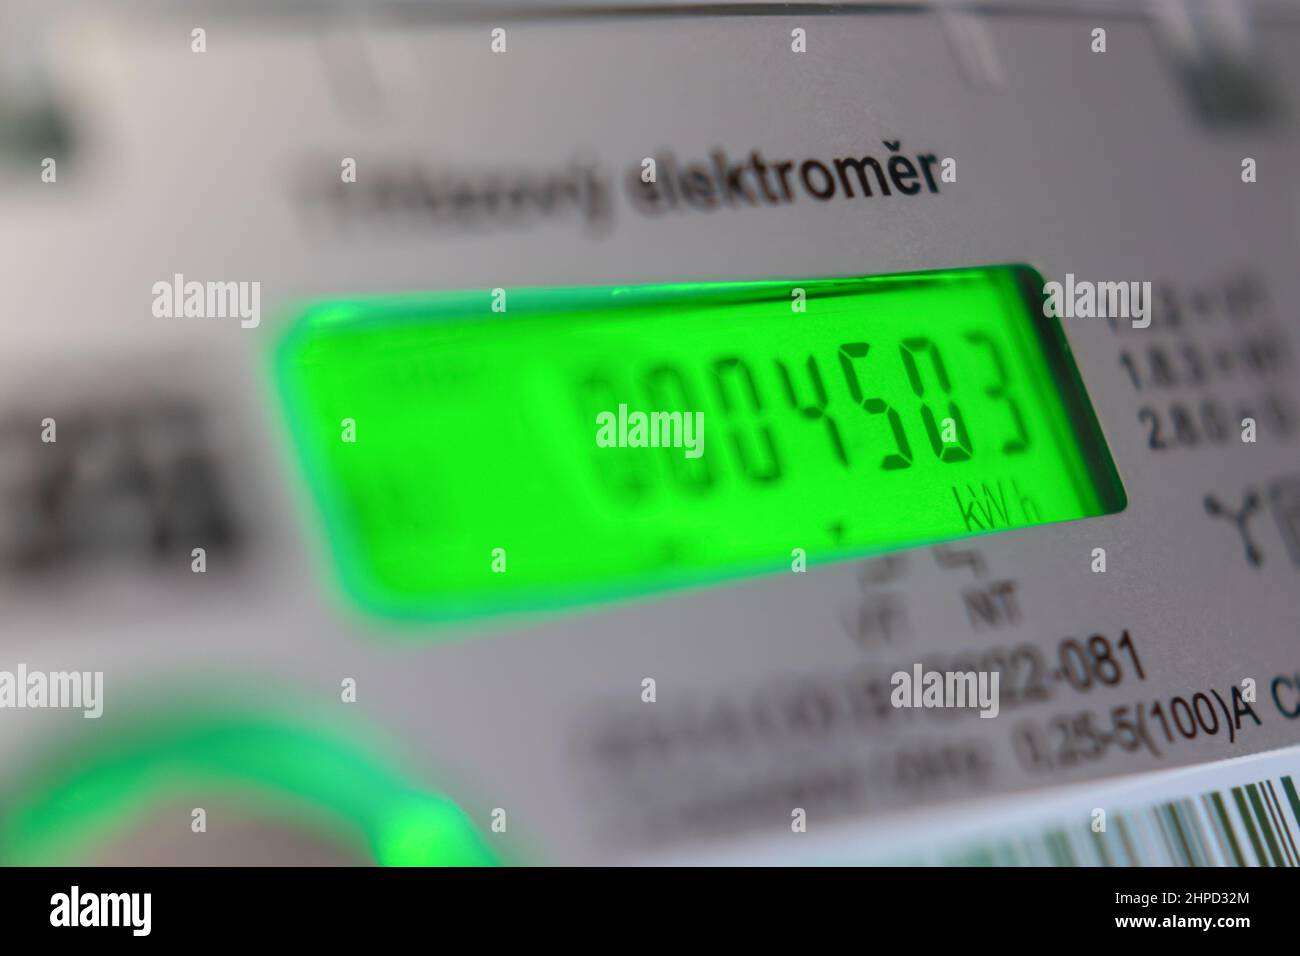 Electricity meter - close-up view of the meter counter, digits showing electricity consumption Stock Photo